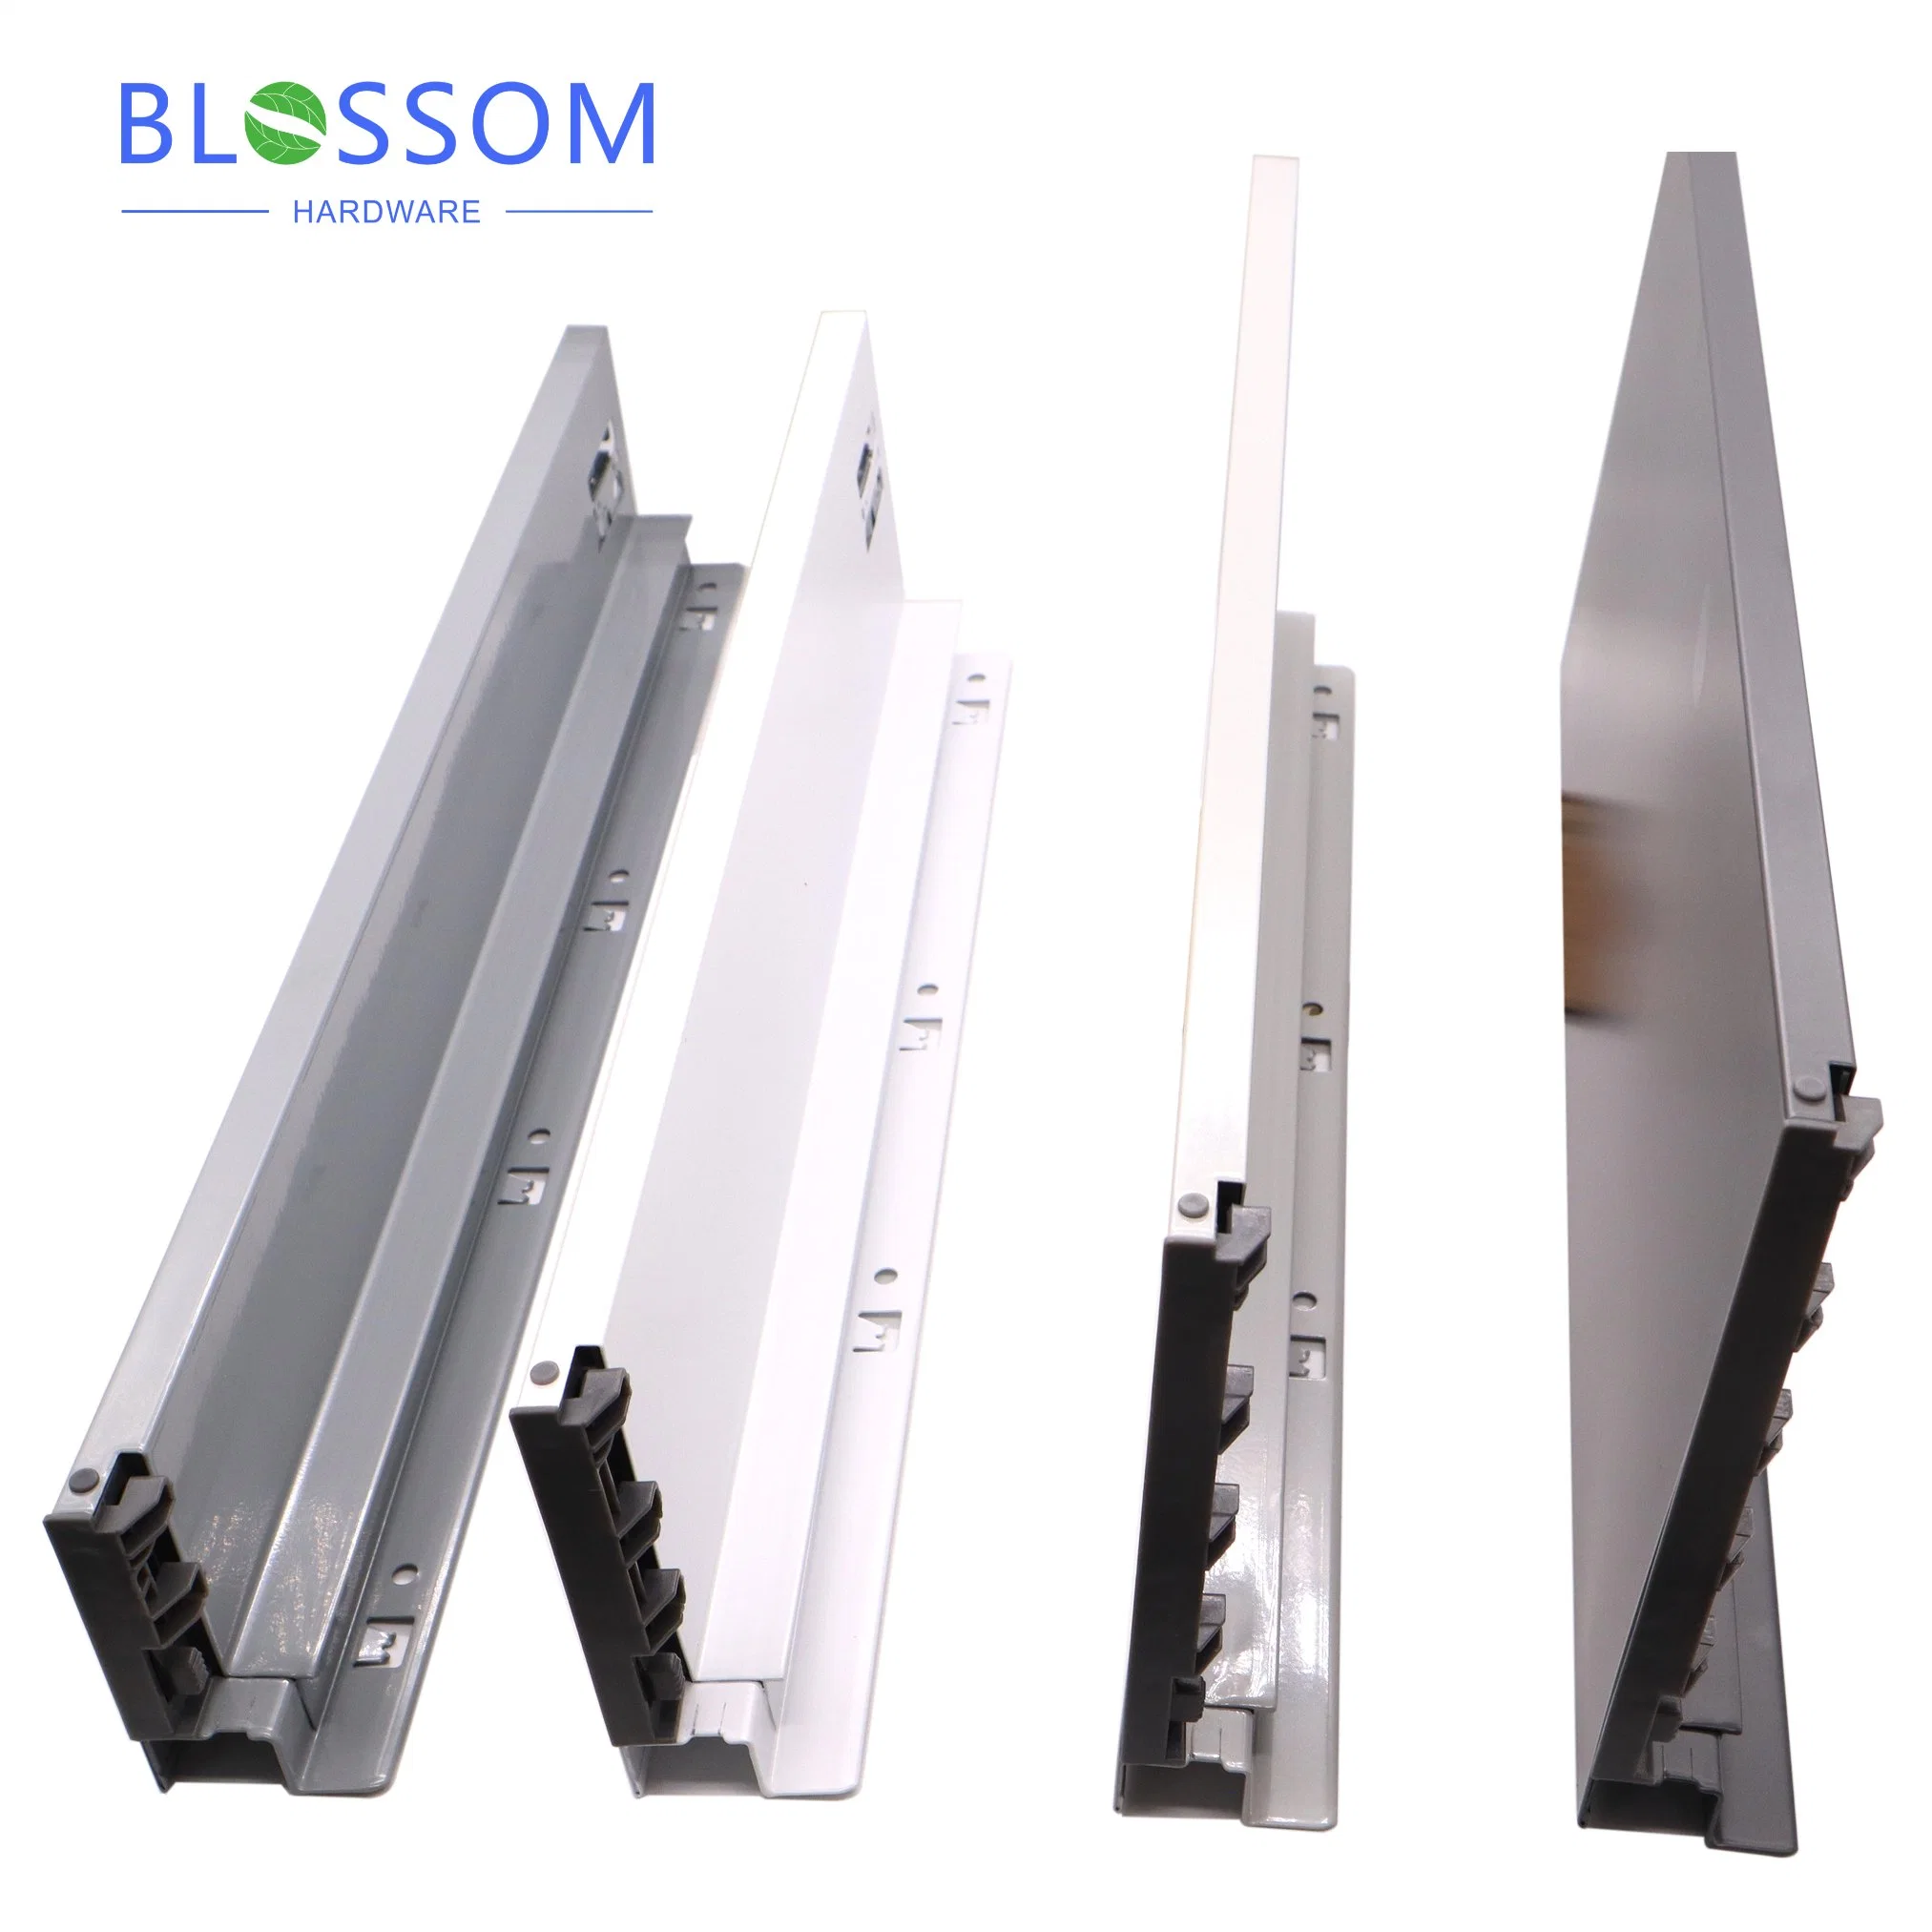 Concealed Drawer Slide Channels Double Wall Soft Closing Metal Tandem Box for Drawer Accessories High quality/High cost performance 